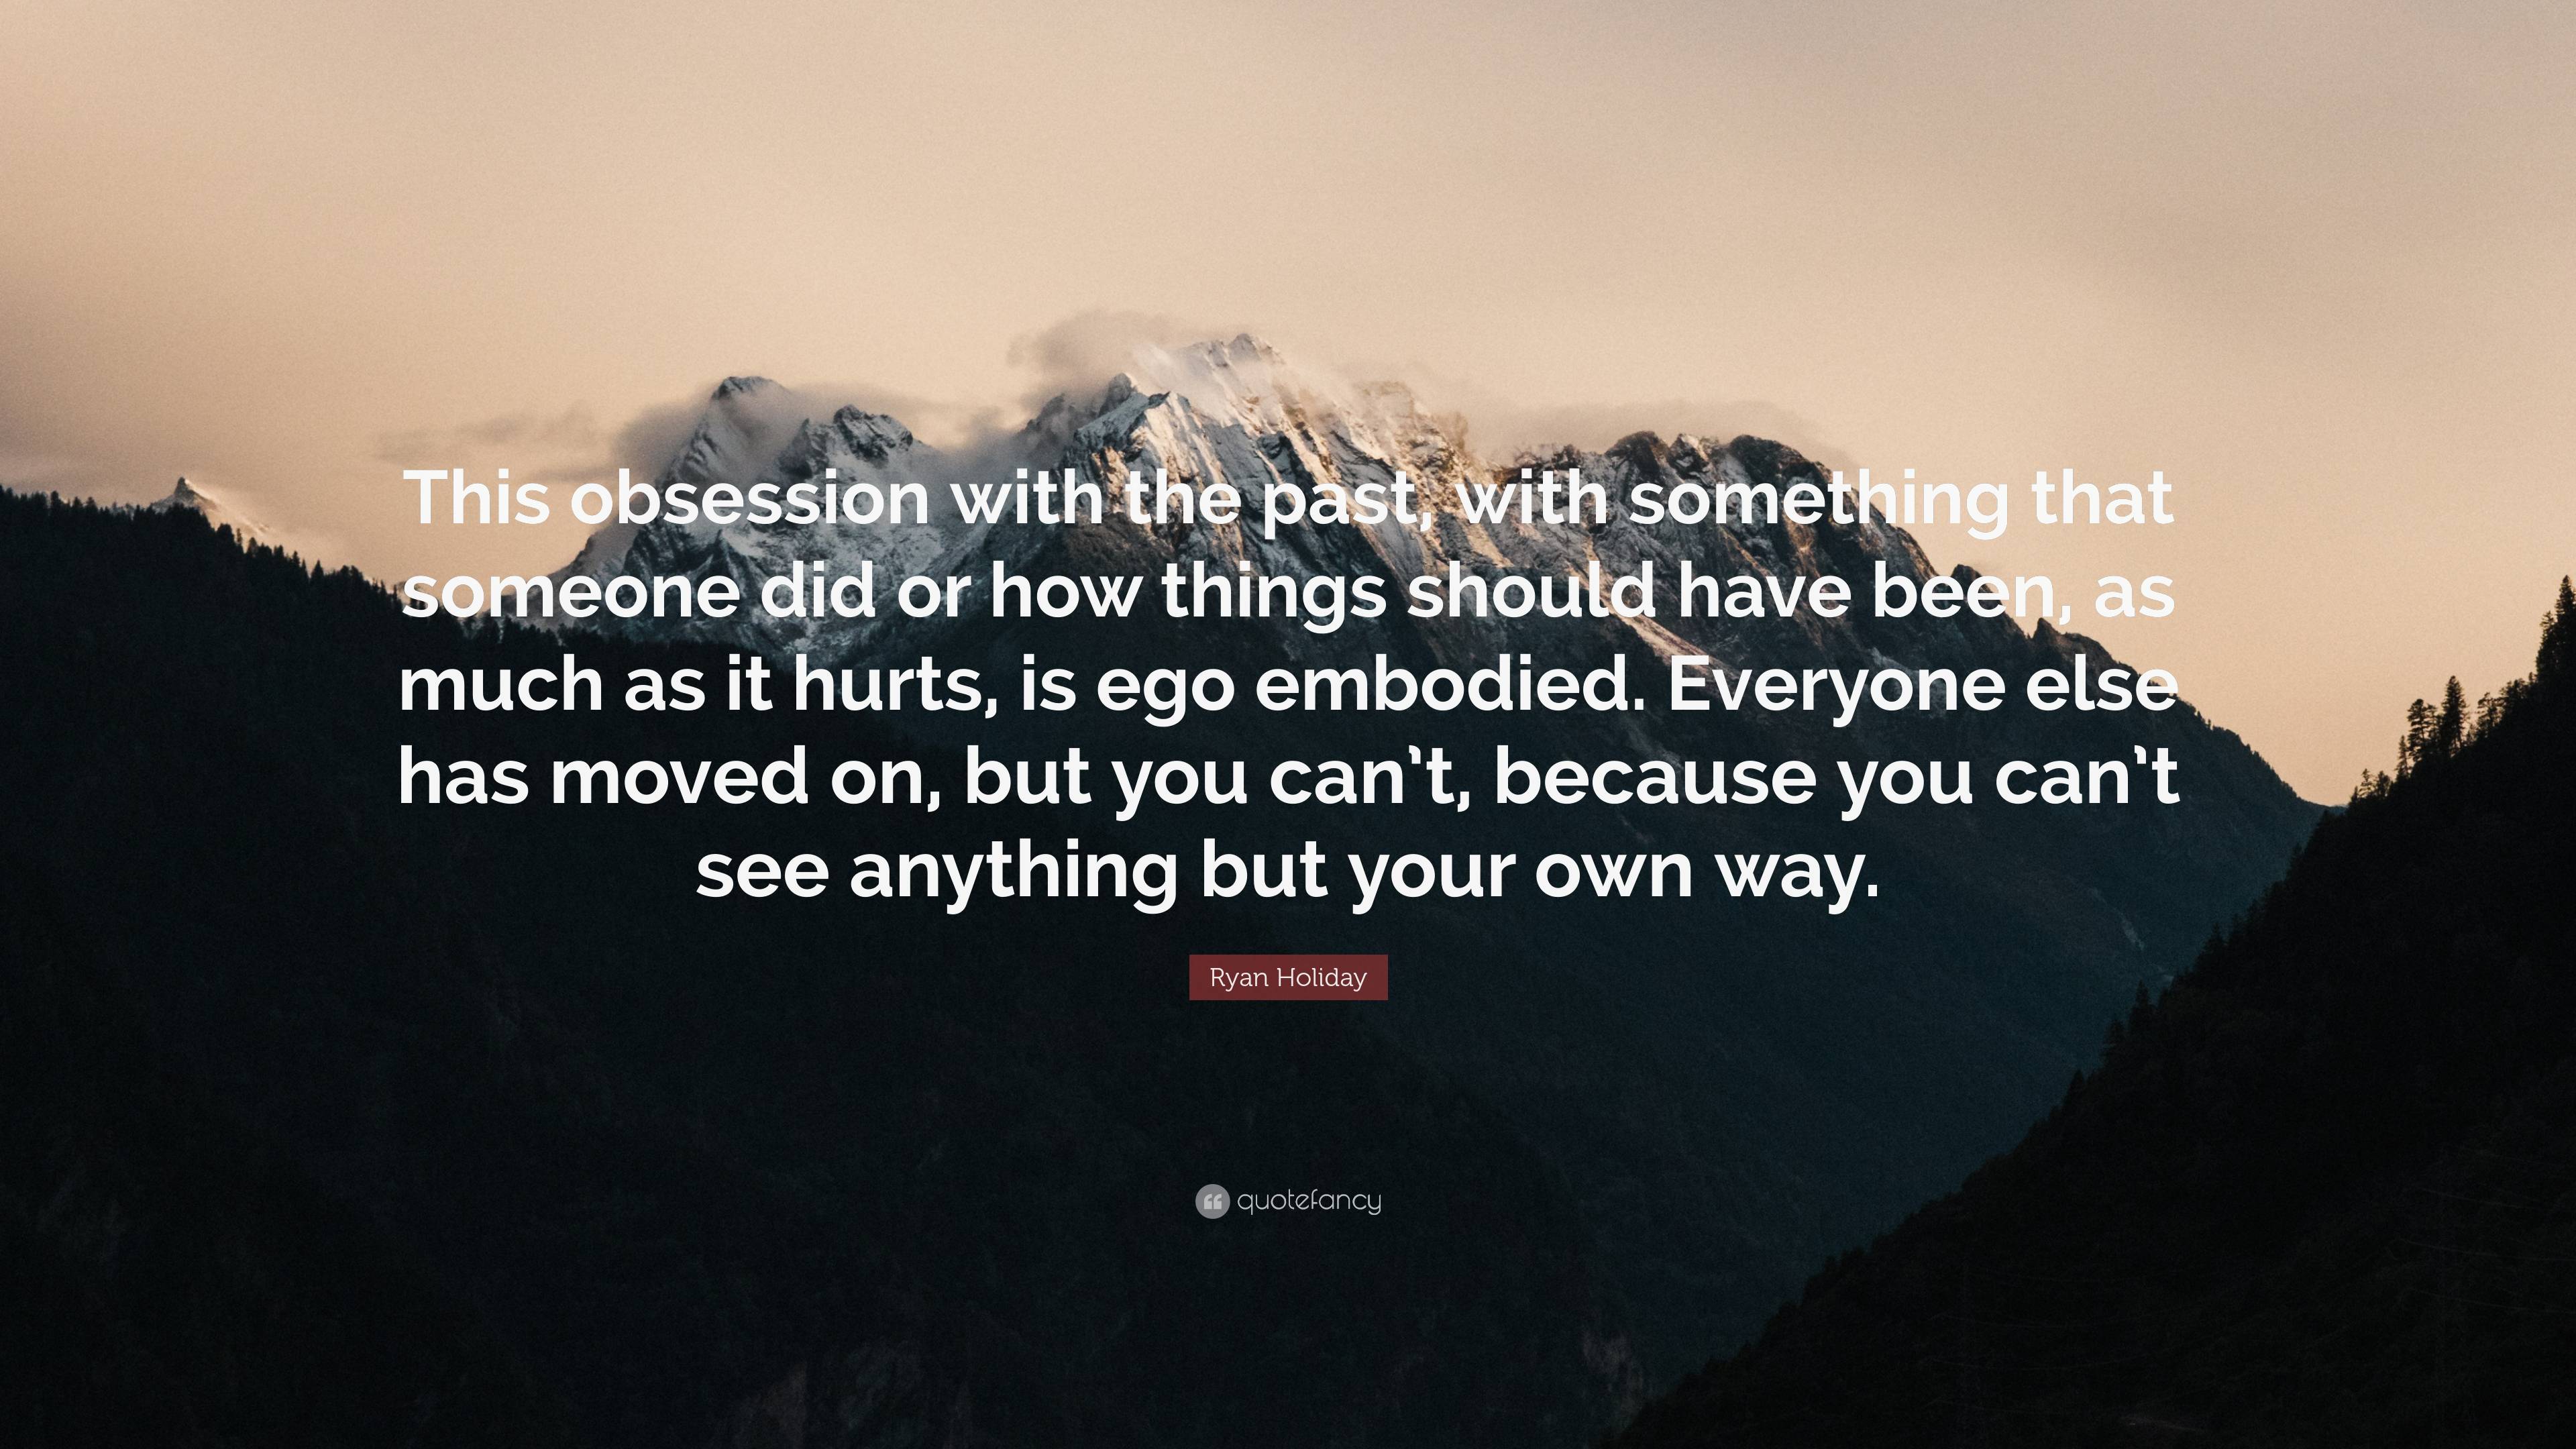 Ryan Holiday Quote: “This obsession with the past, with something that ...